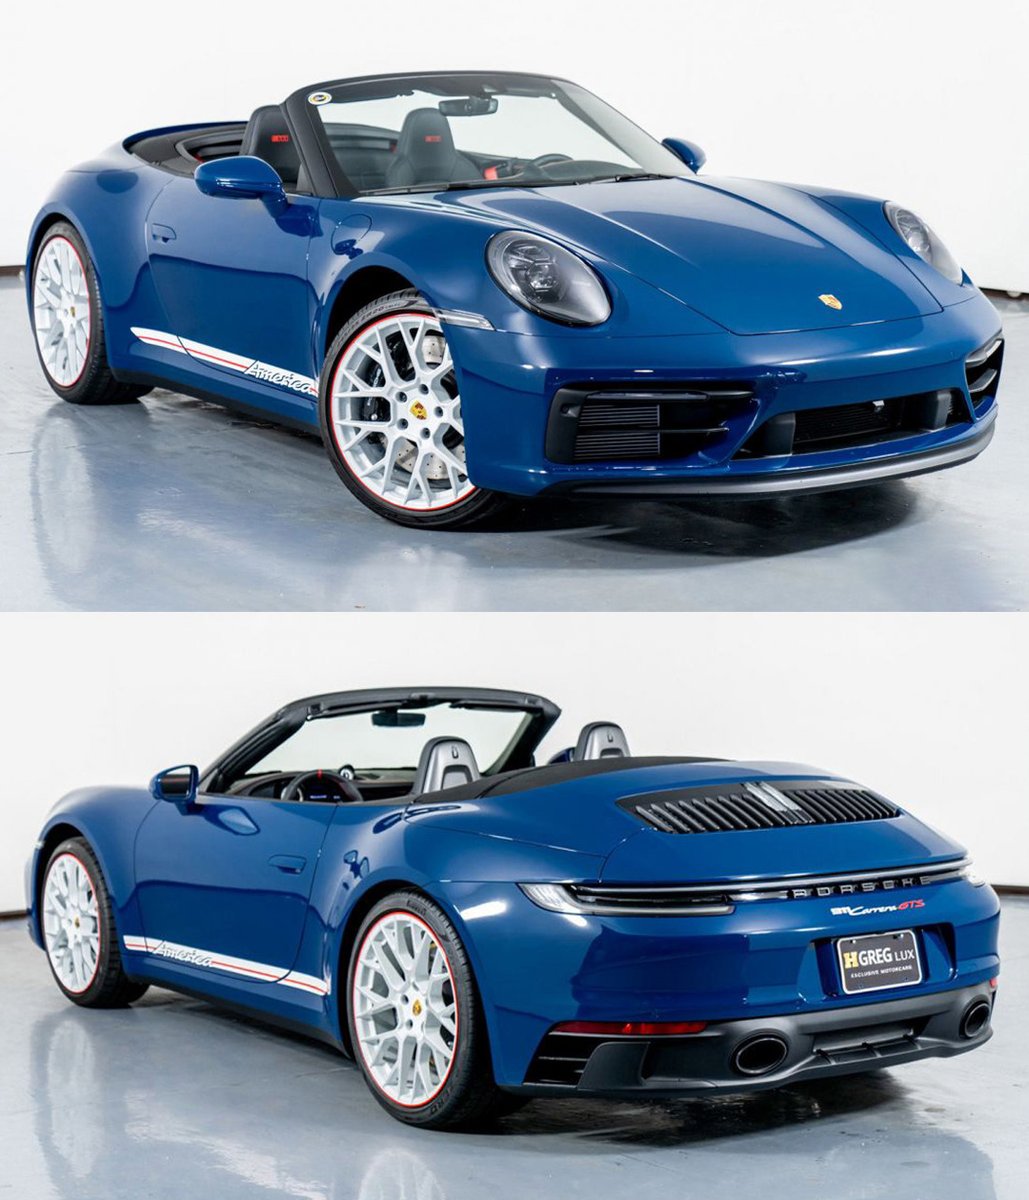 2023 Porsche 911 Carrera GTS Cabriolet America Edition | 1 of only 115!! 🇺🇸 Asking price: $309,000
-
For More Info: bit.ly/43FG0Yf